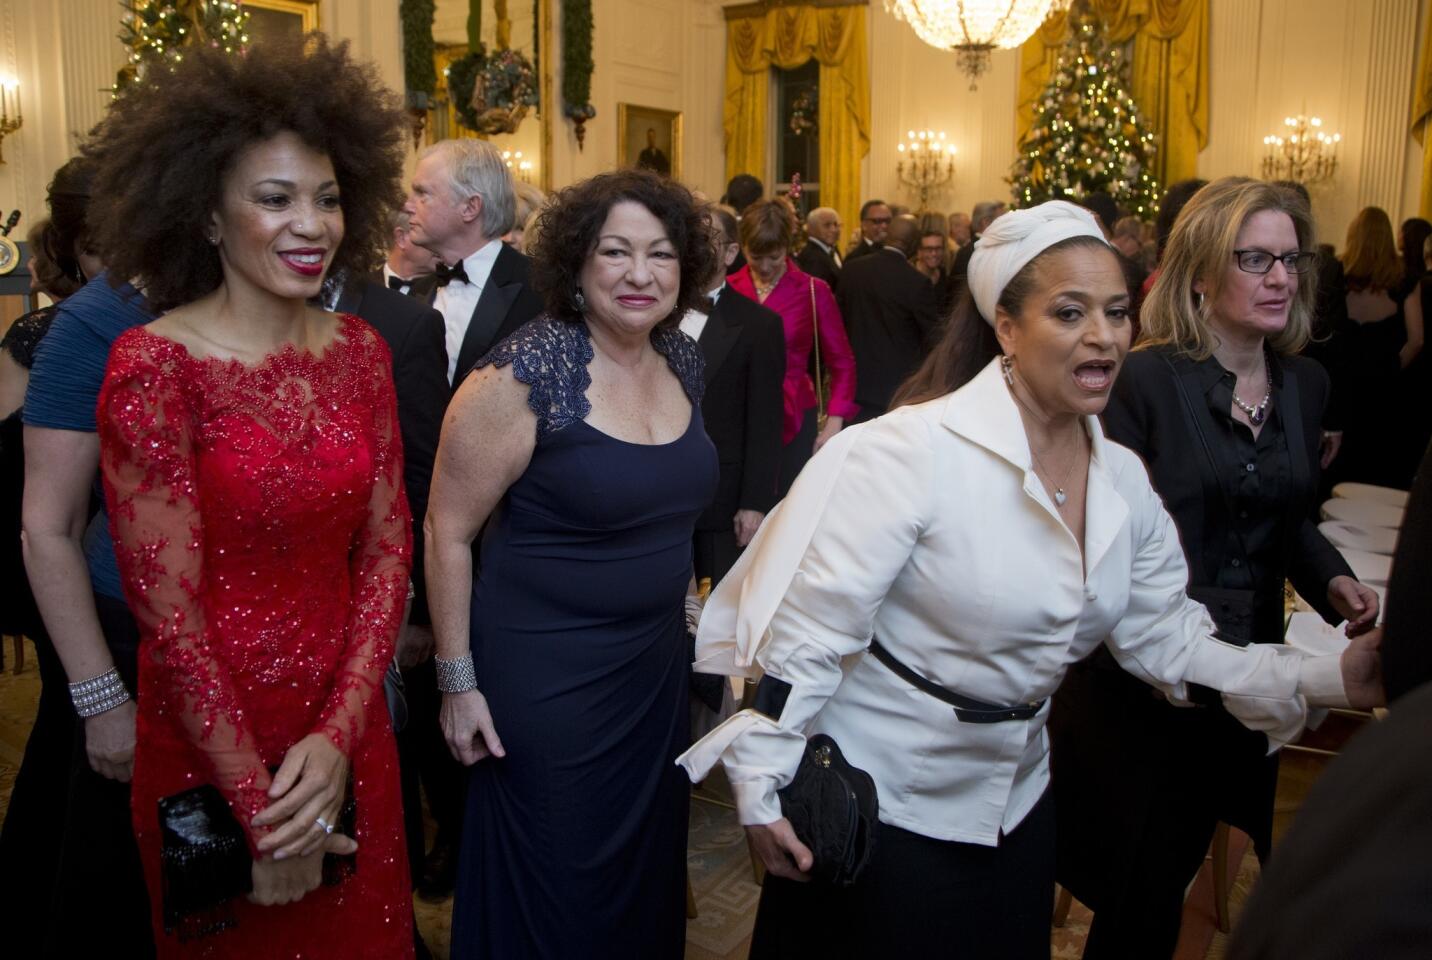 Kennedy Center Honors 2013